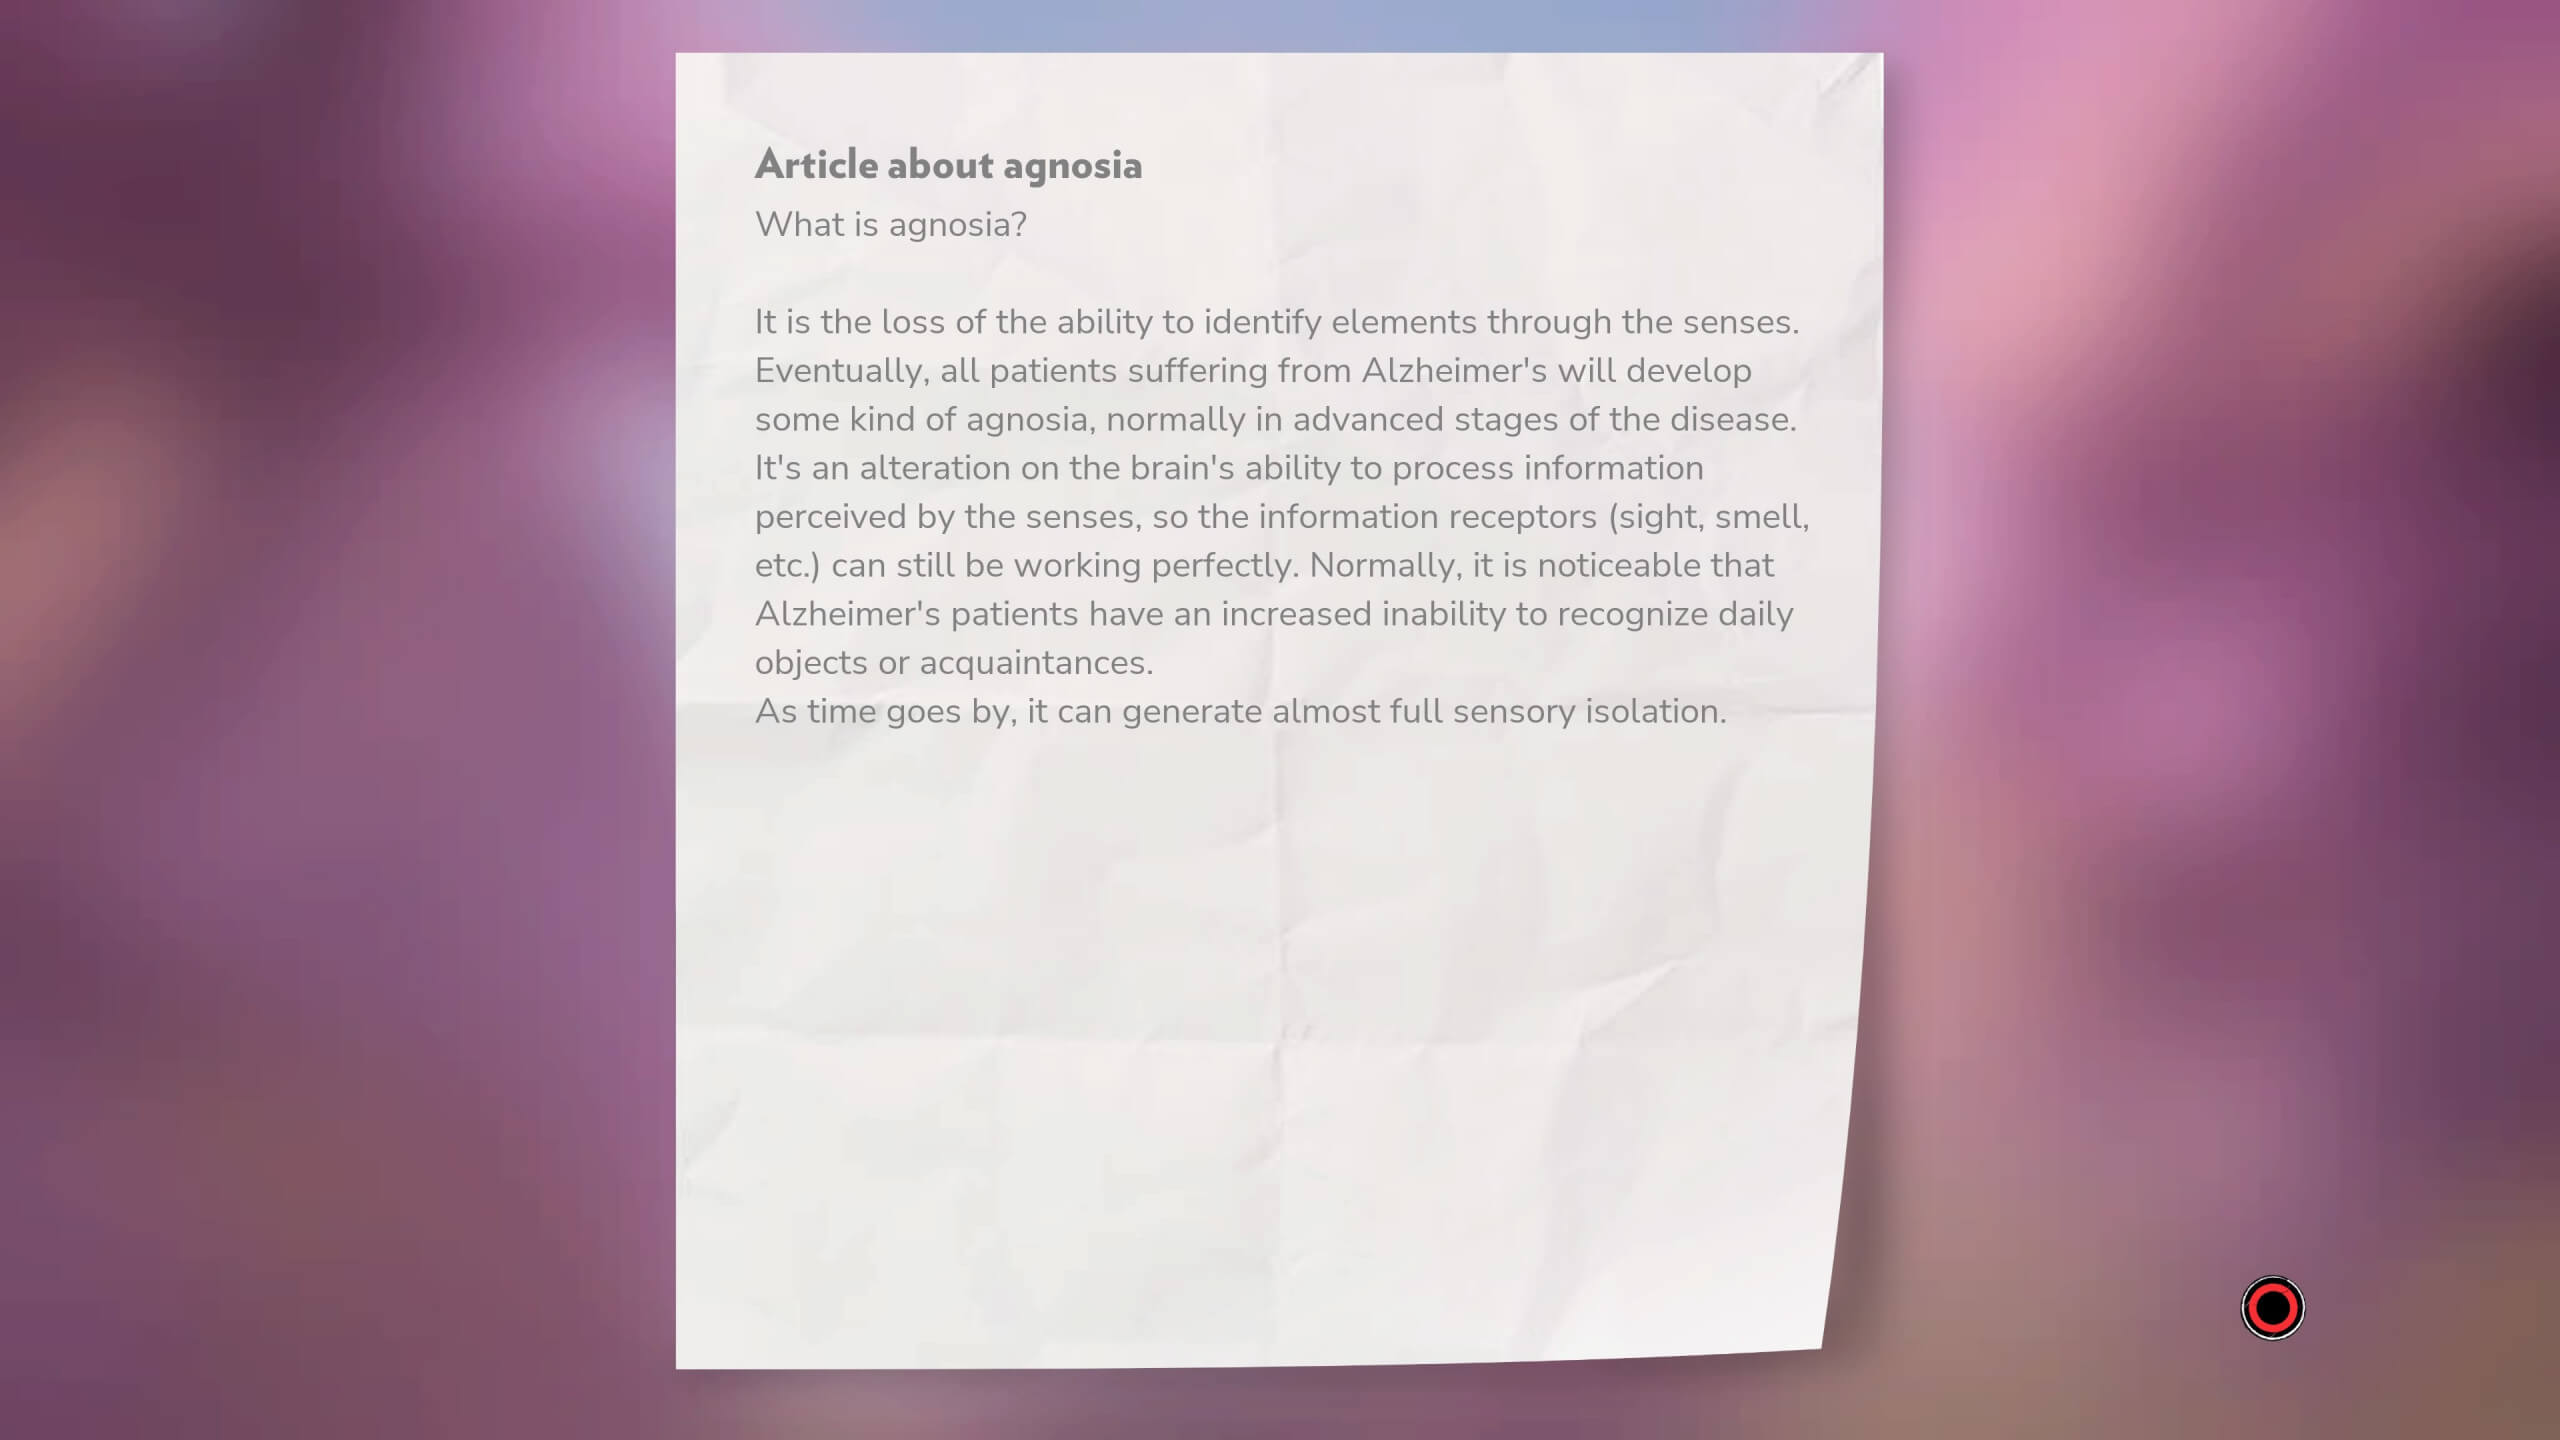 The collectibles in the game provide the player more information about aspects of Alzheimers, This one references Agnosia which appears in cases that stops sufferers from being able to identify elements through senses